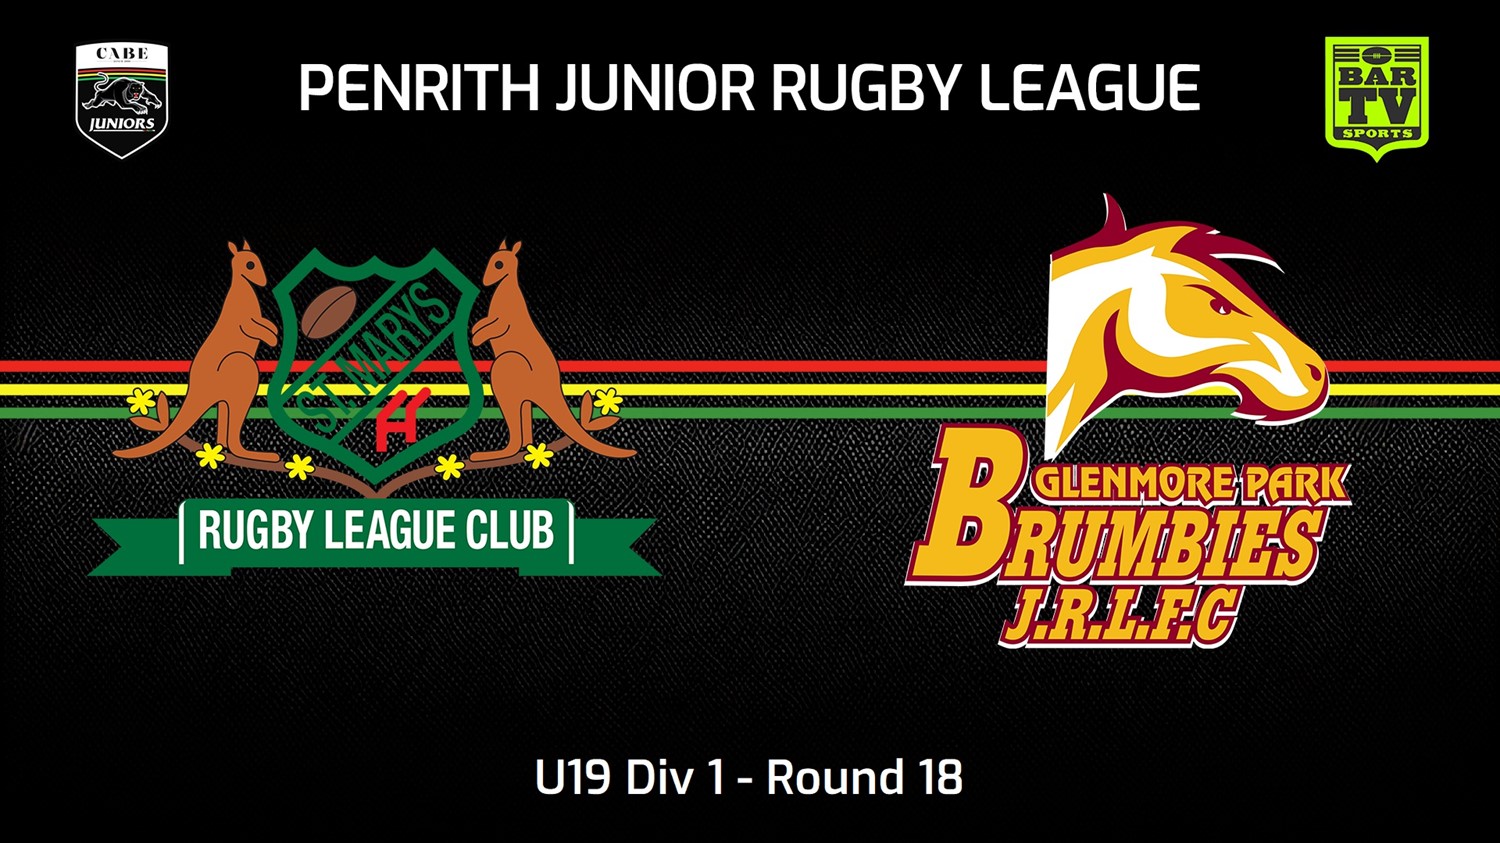 240420-video-Penrith & District Junior Rugby League Round 18 - U19 Div 1 - St Marys v Glenmore Park Brumbies Slate Image